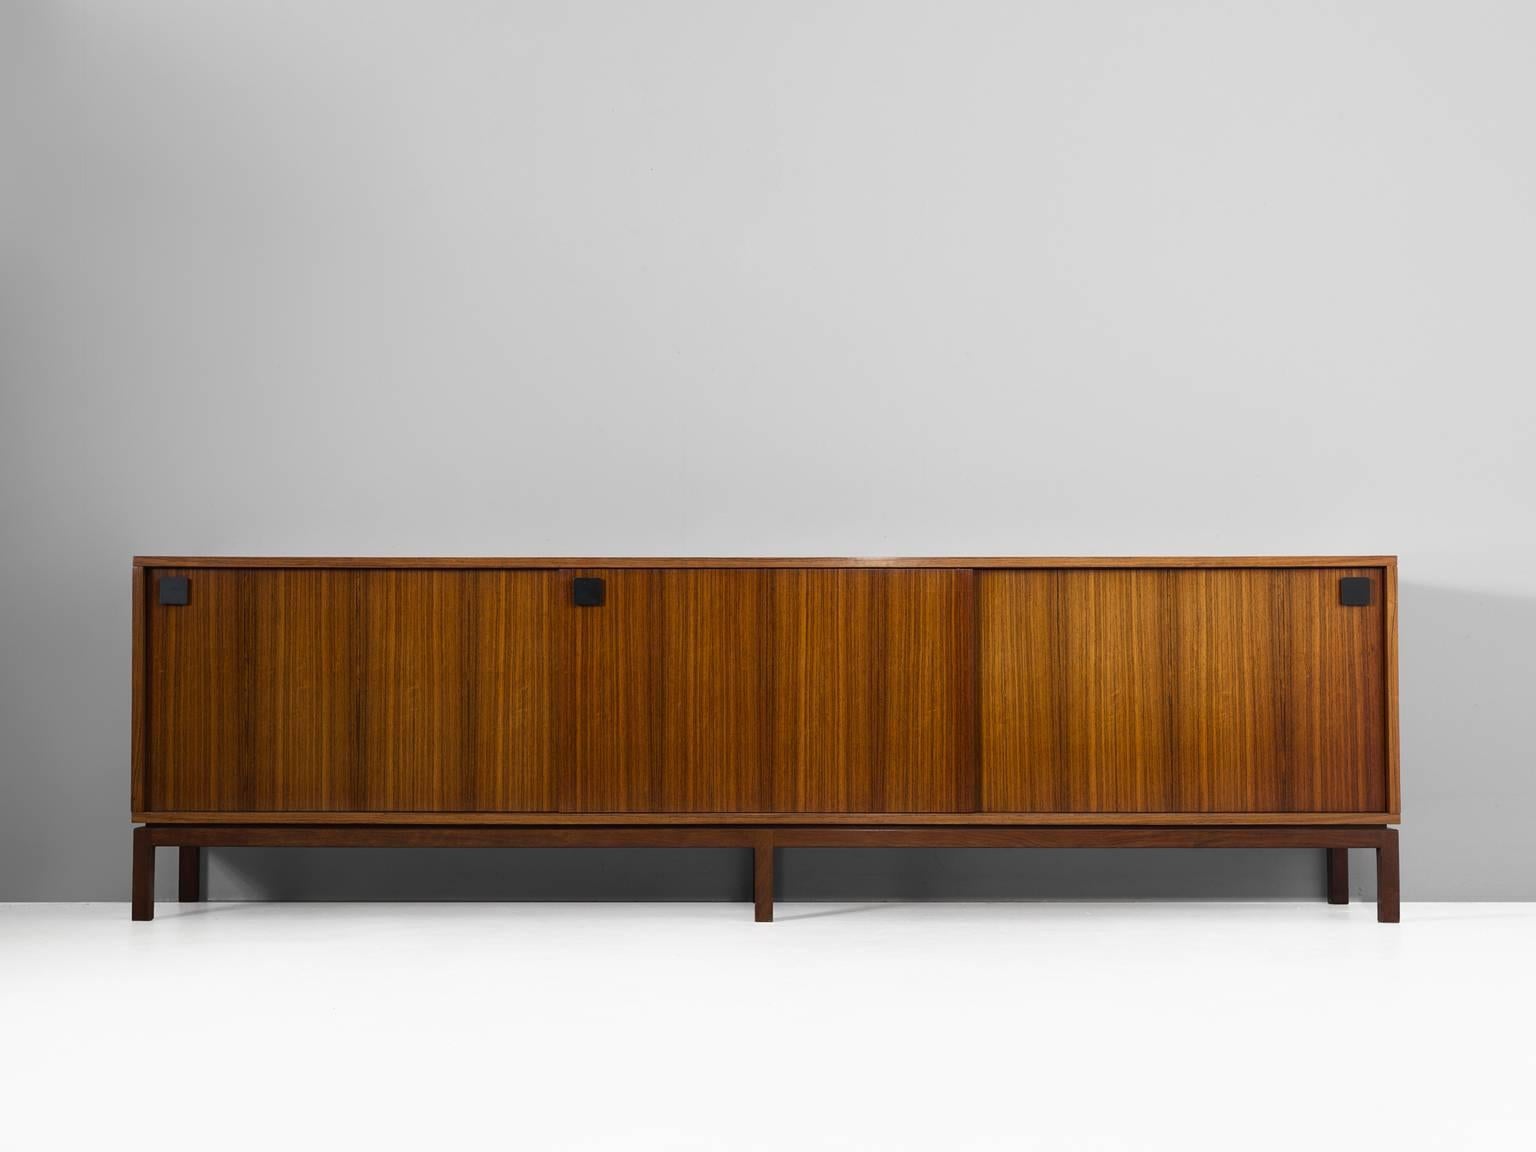 Sideboard in rosewood and maple, by Alfred Hendrickx for Belform, Belgium 1960s.

Large sideboard in rosewood. This credenza consists of three sliding doors with characteristic black square handles. The design of this model is simplistic, with